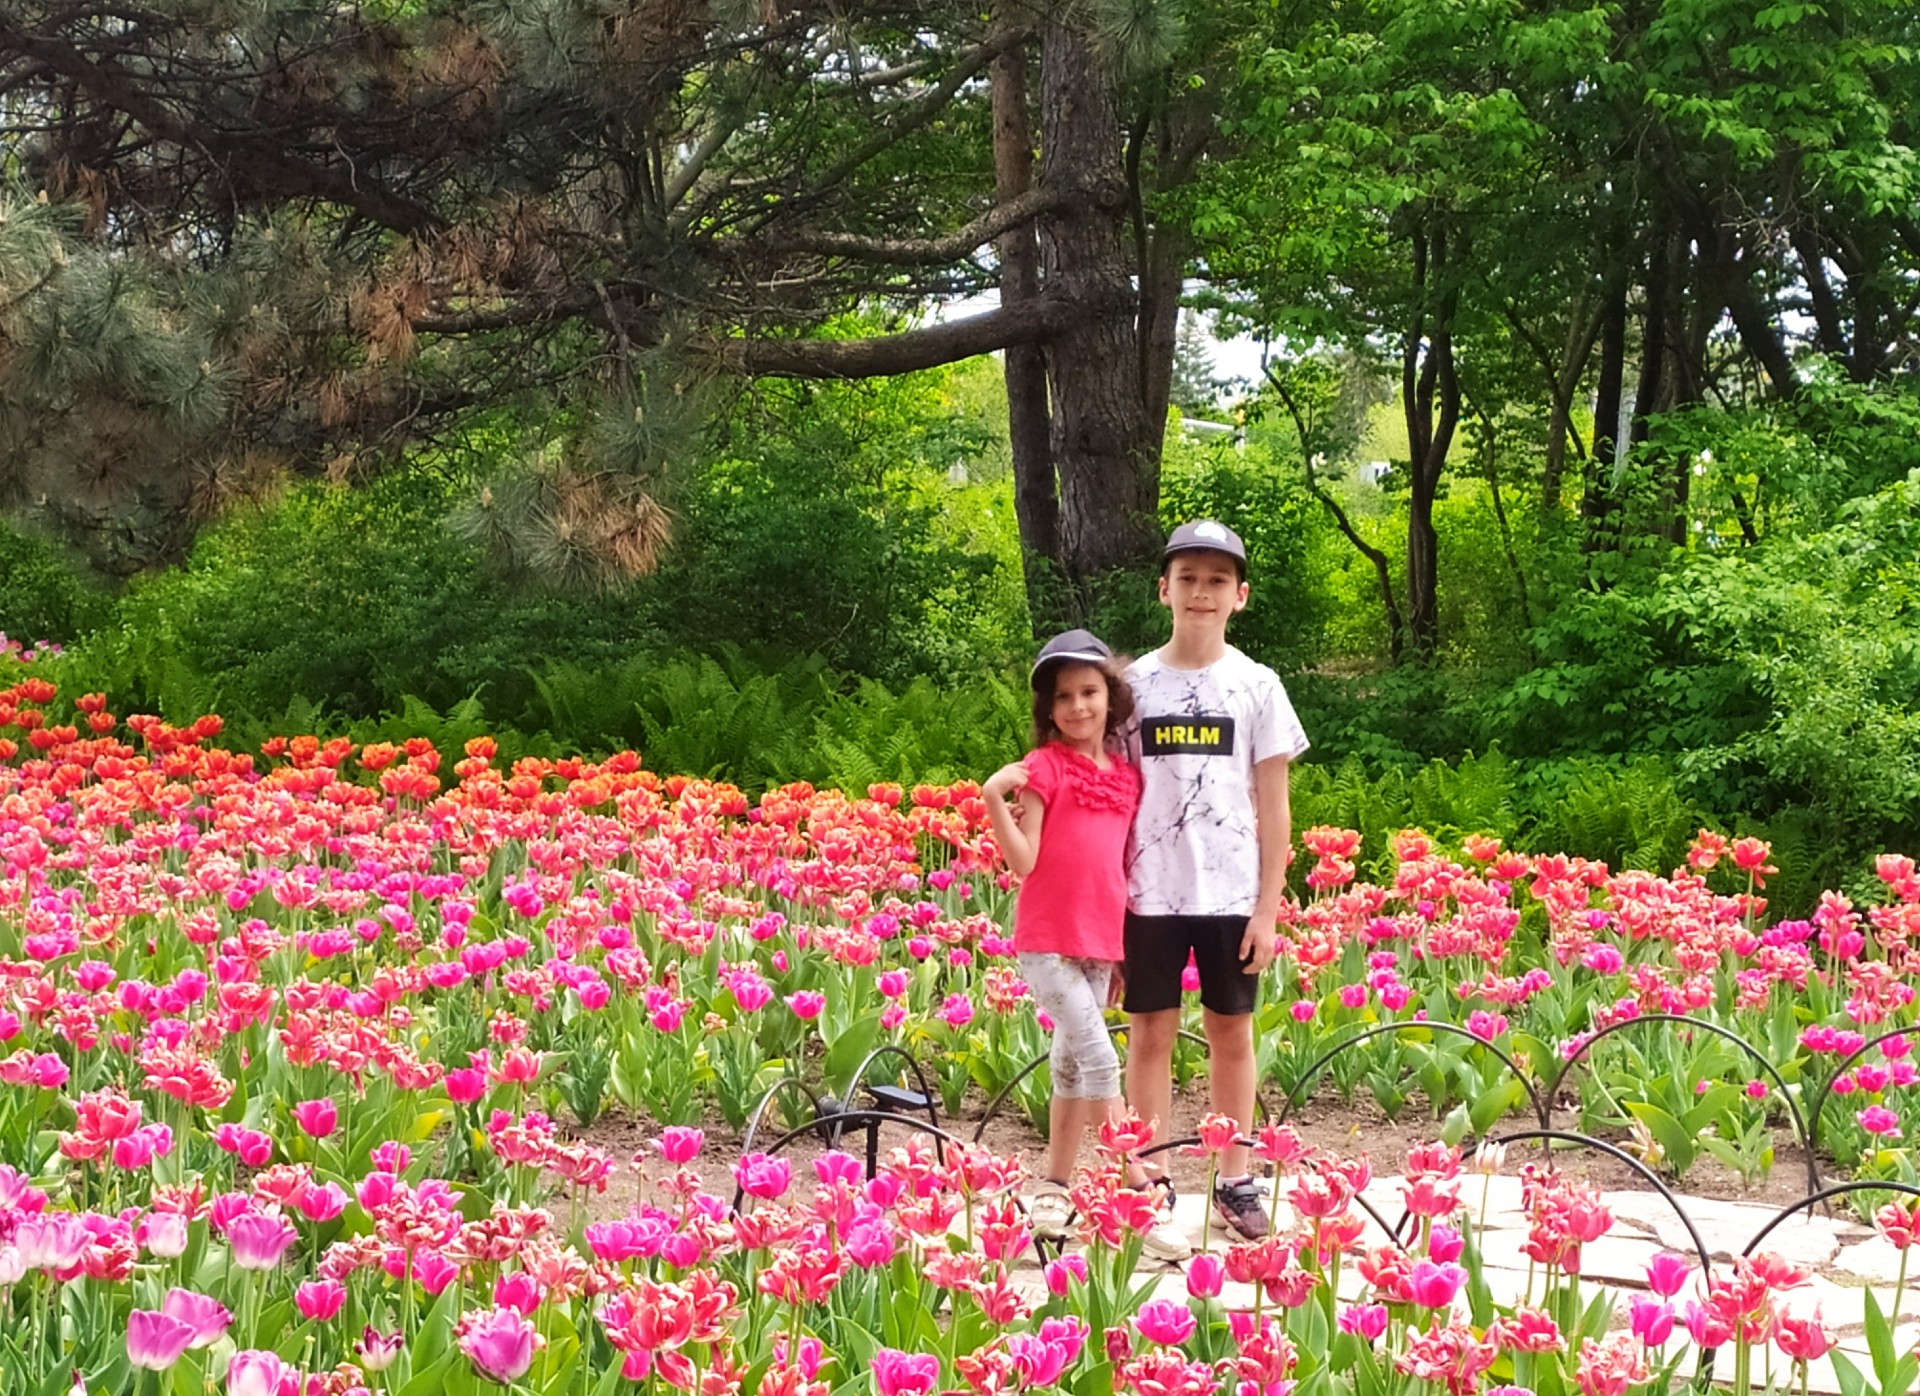 Timur and Liana stand in a bed of pink tulips